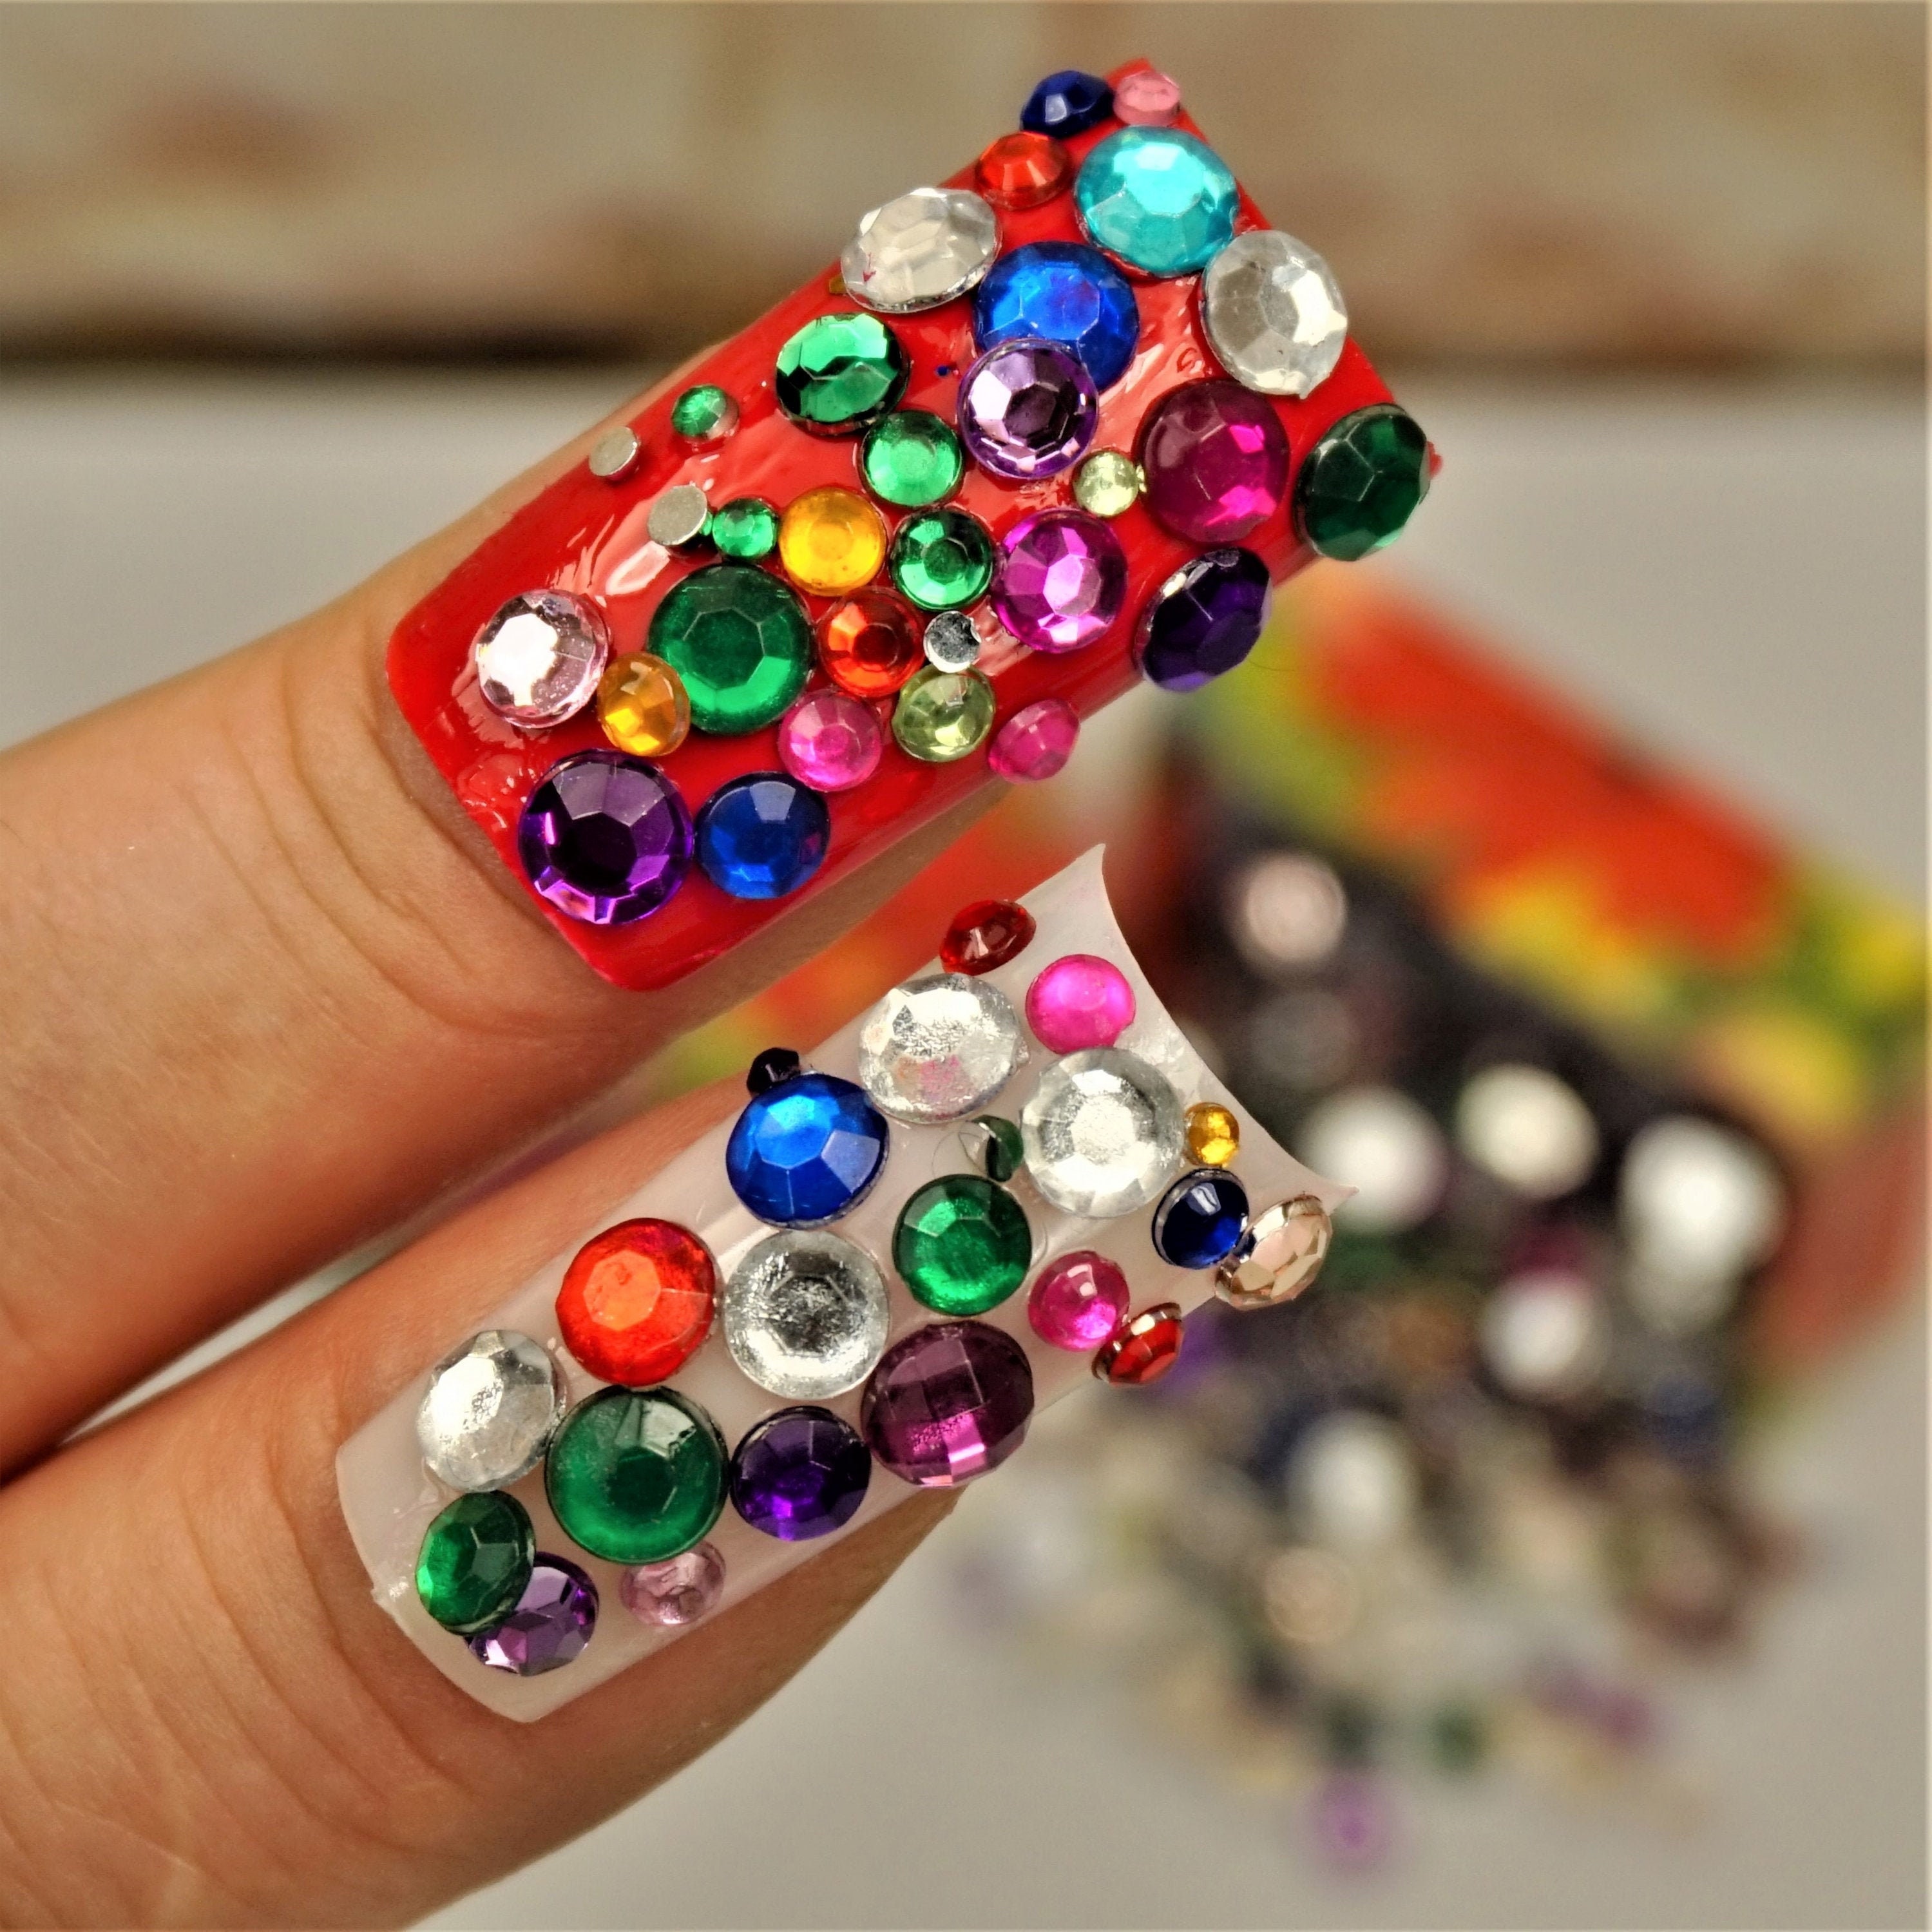 5pcs Heart Shaped Nail Art Charms With Iridescent Rhinestones Y2k Dopamine  Style 3d Colorful And Cute Heart Nail Charms With Colorful Flatback Nail  Gems For Nails Diy Decorations